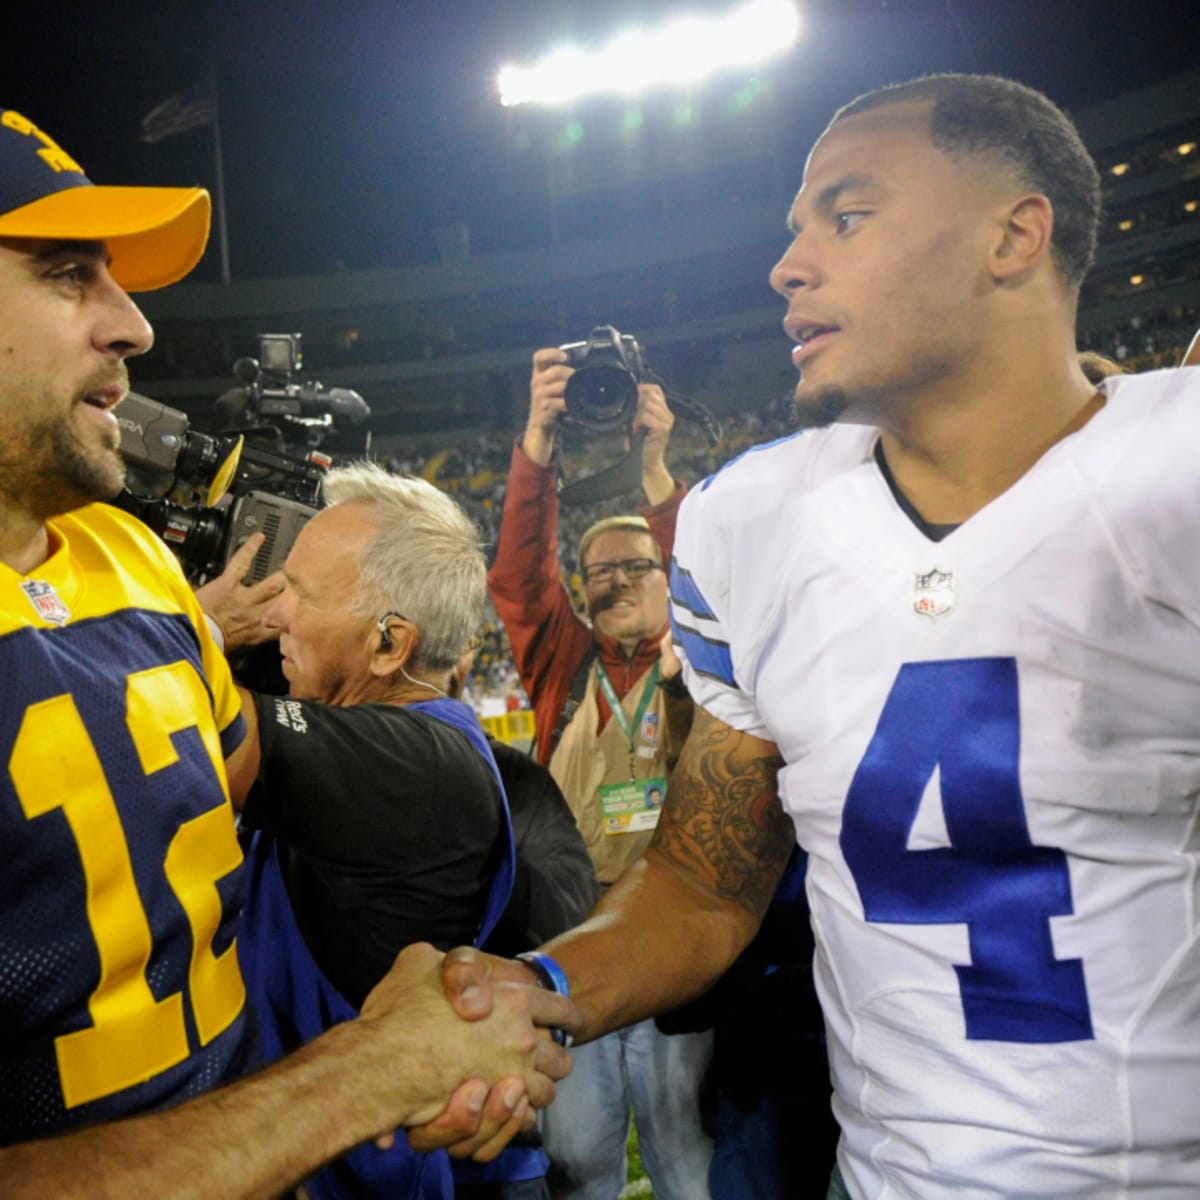 Packers vs. Cowboys 2022 Date Has Been Released - Sports Illustrated